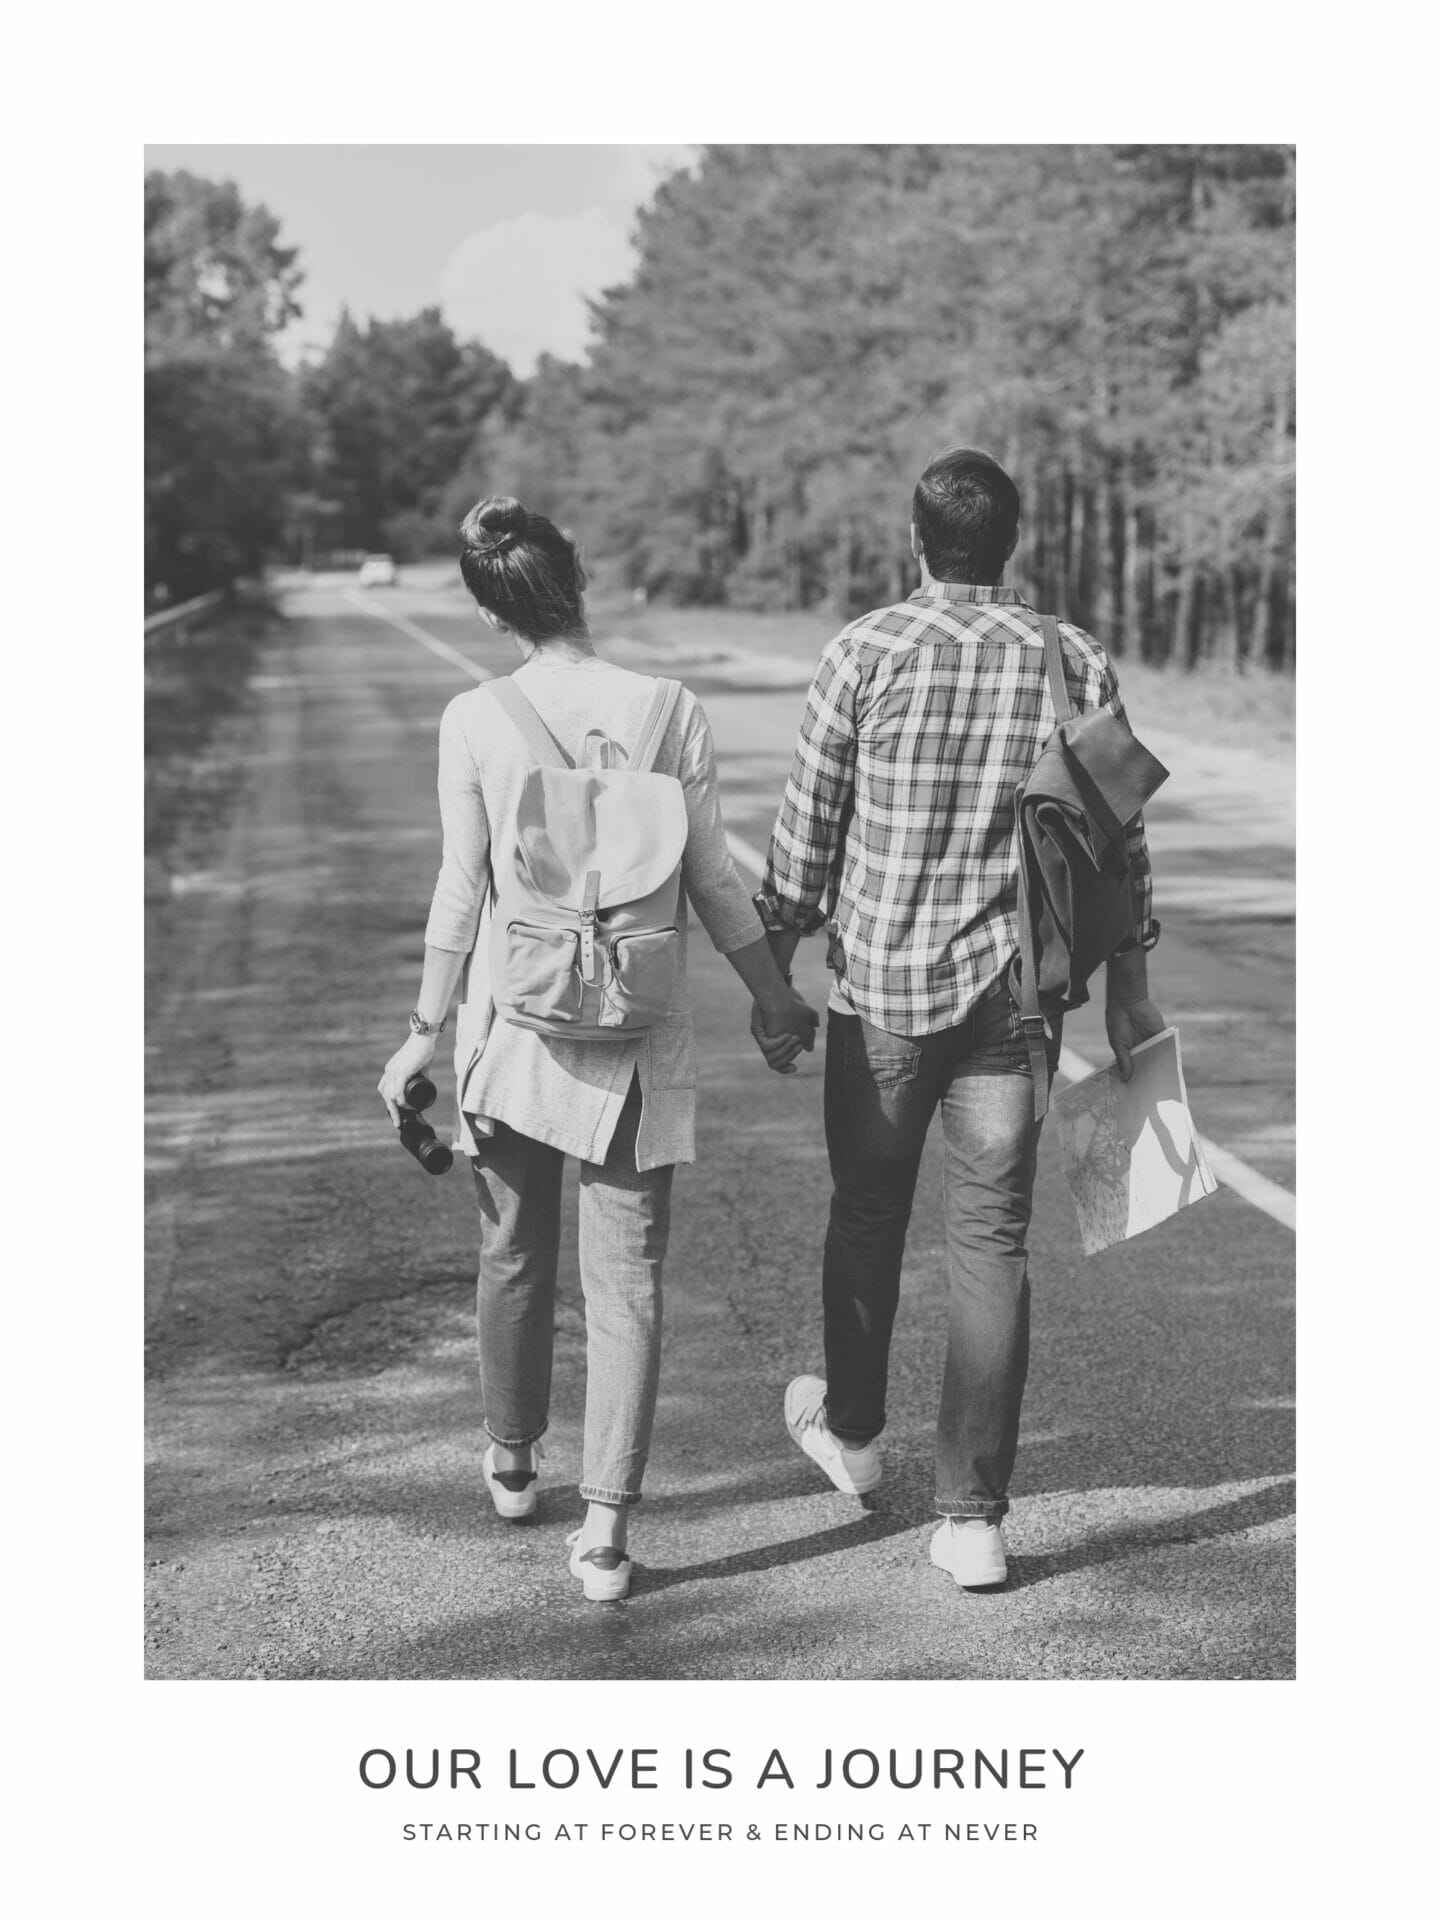 Poster of couple walking down a road together